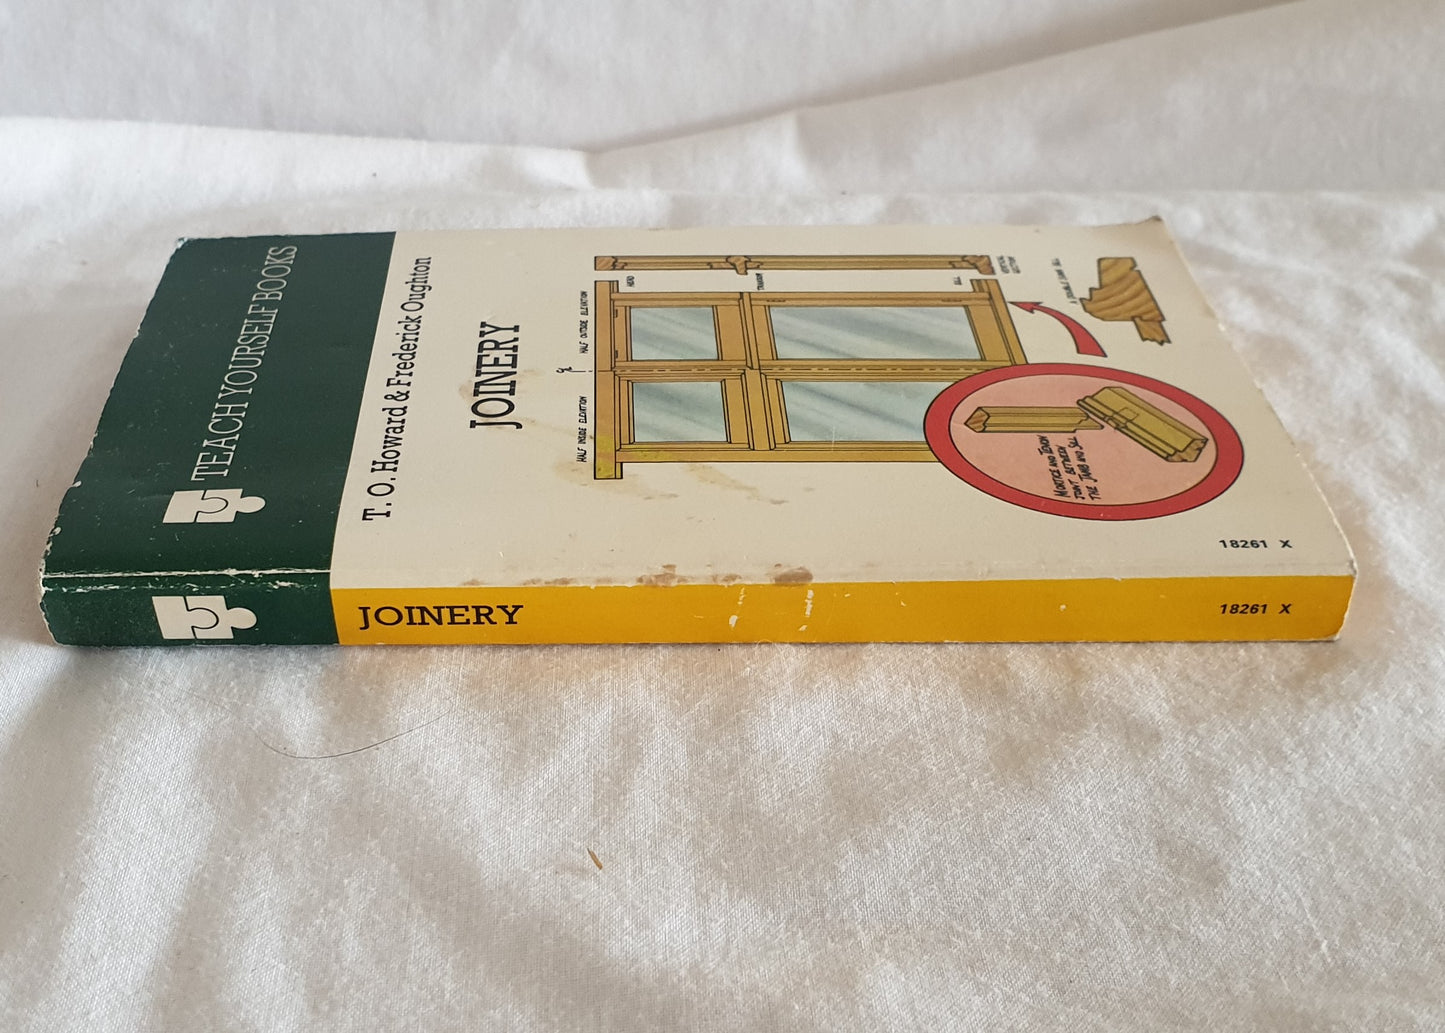 Joinery by T. O. Howard